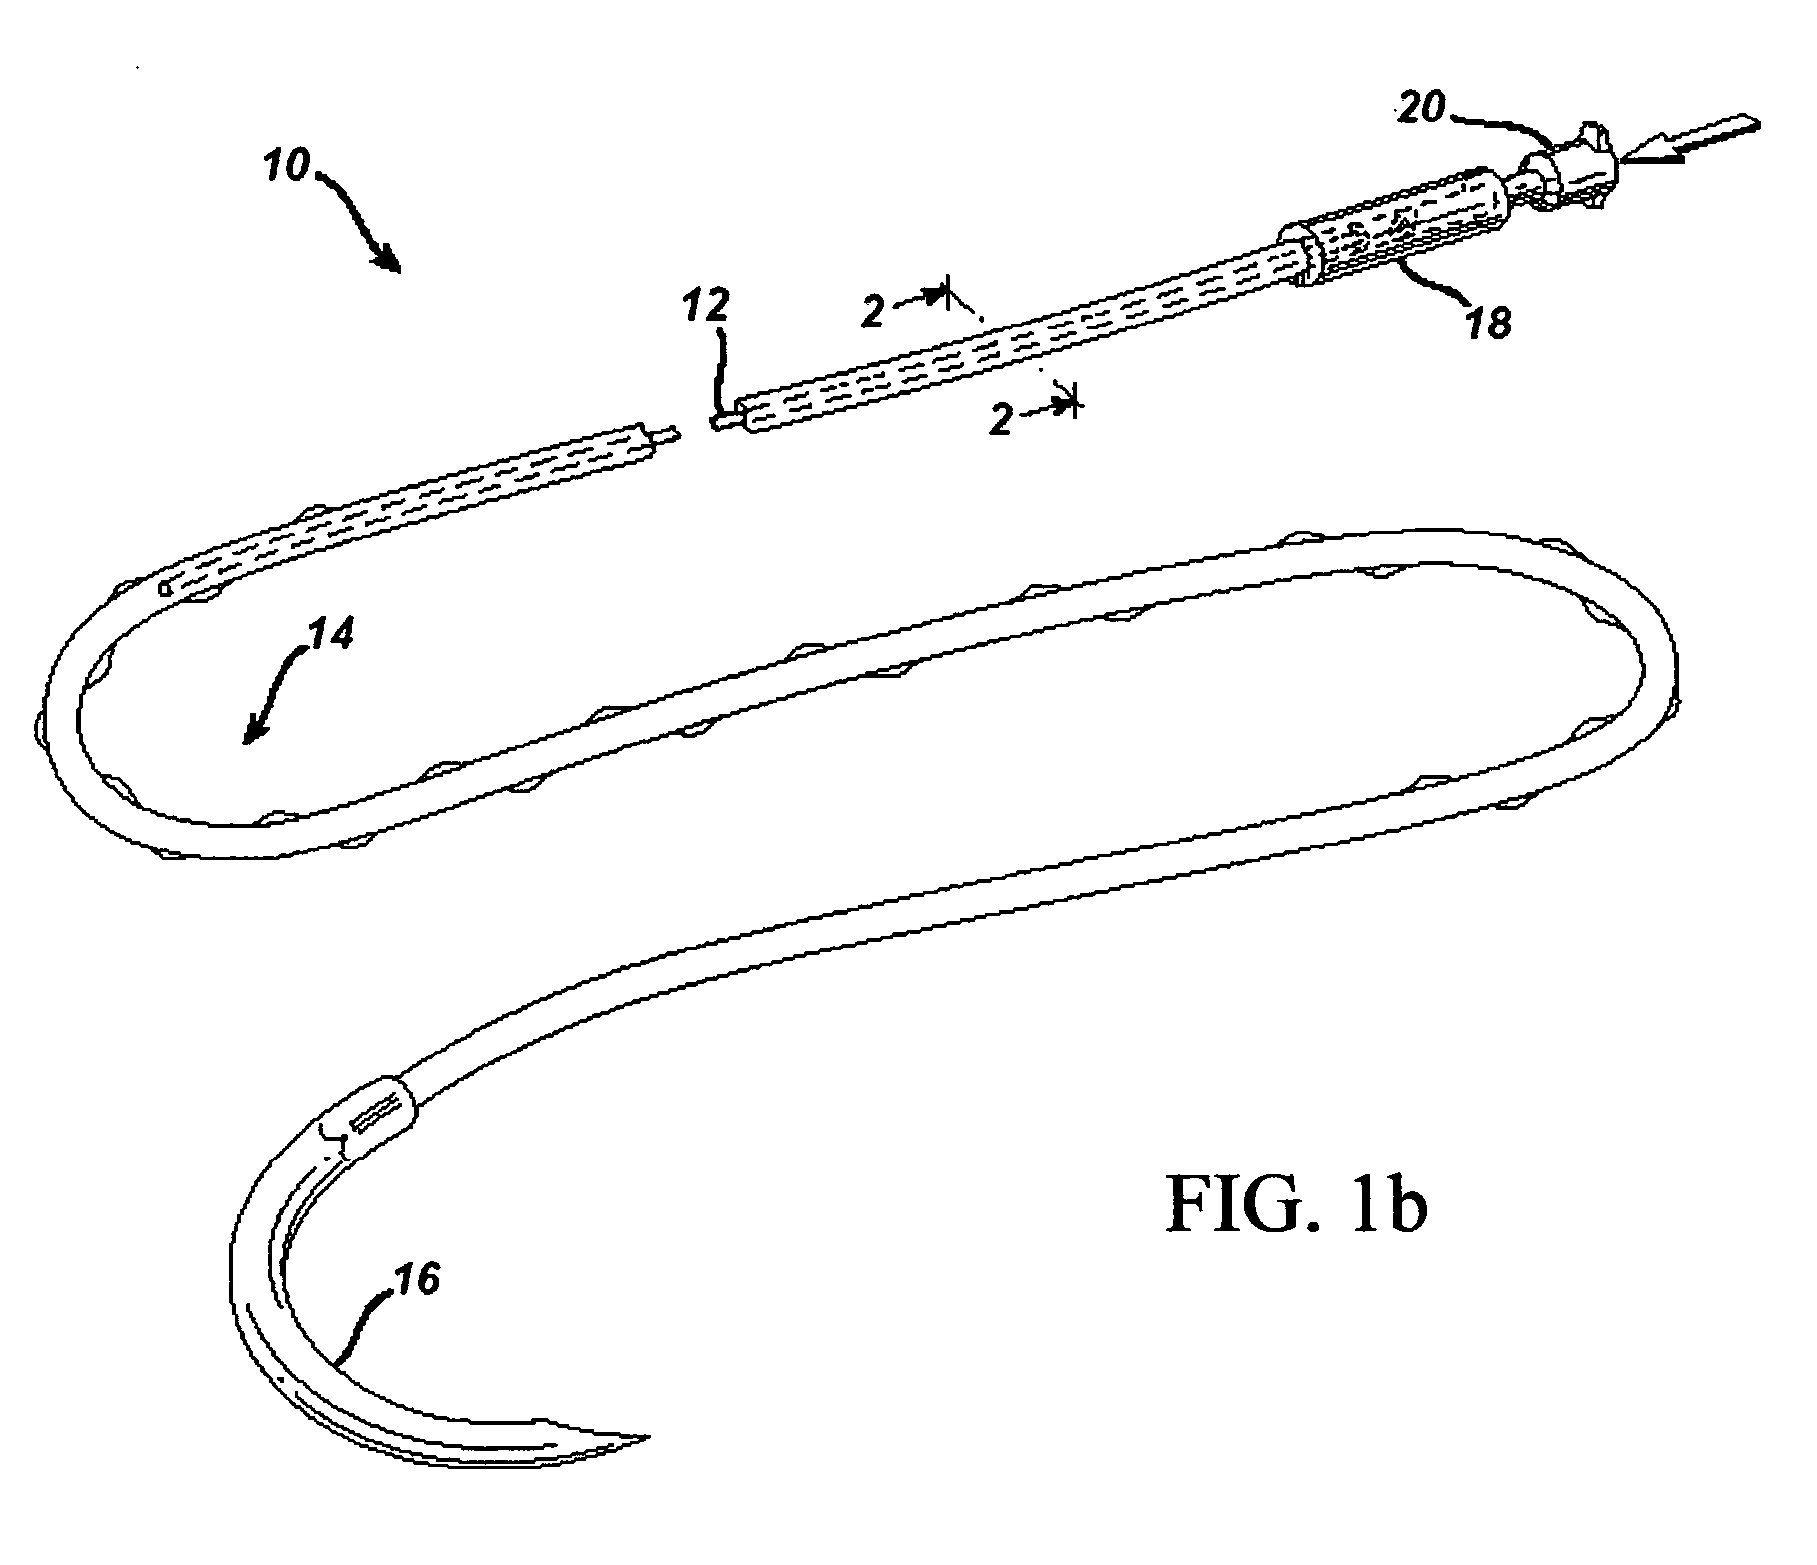 Active suture for the delivery of therapeutic fluids